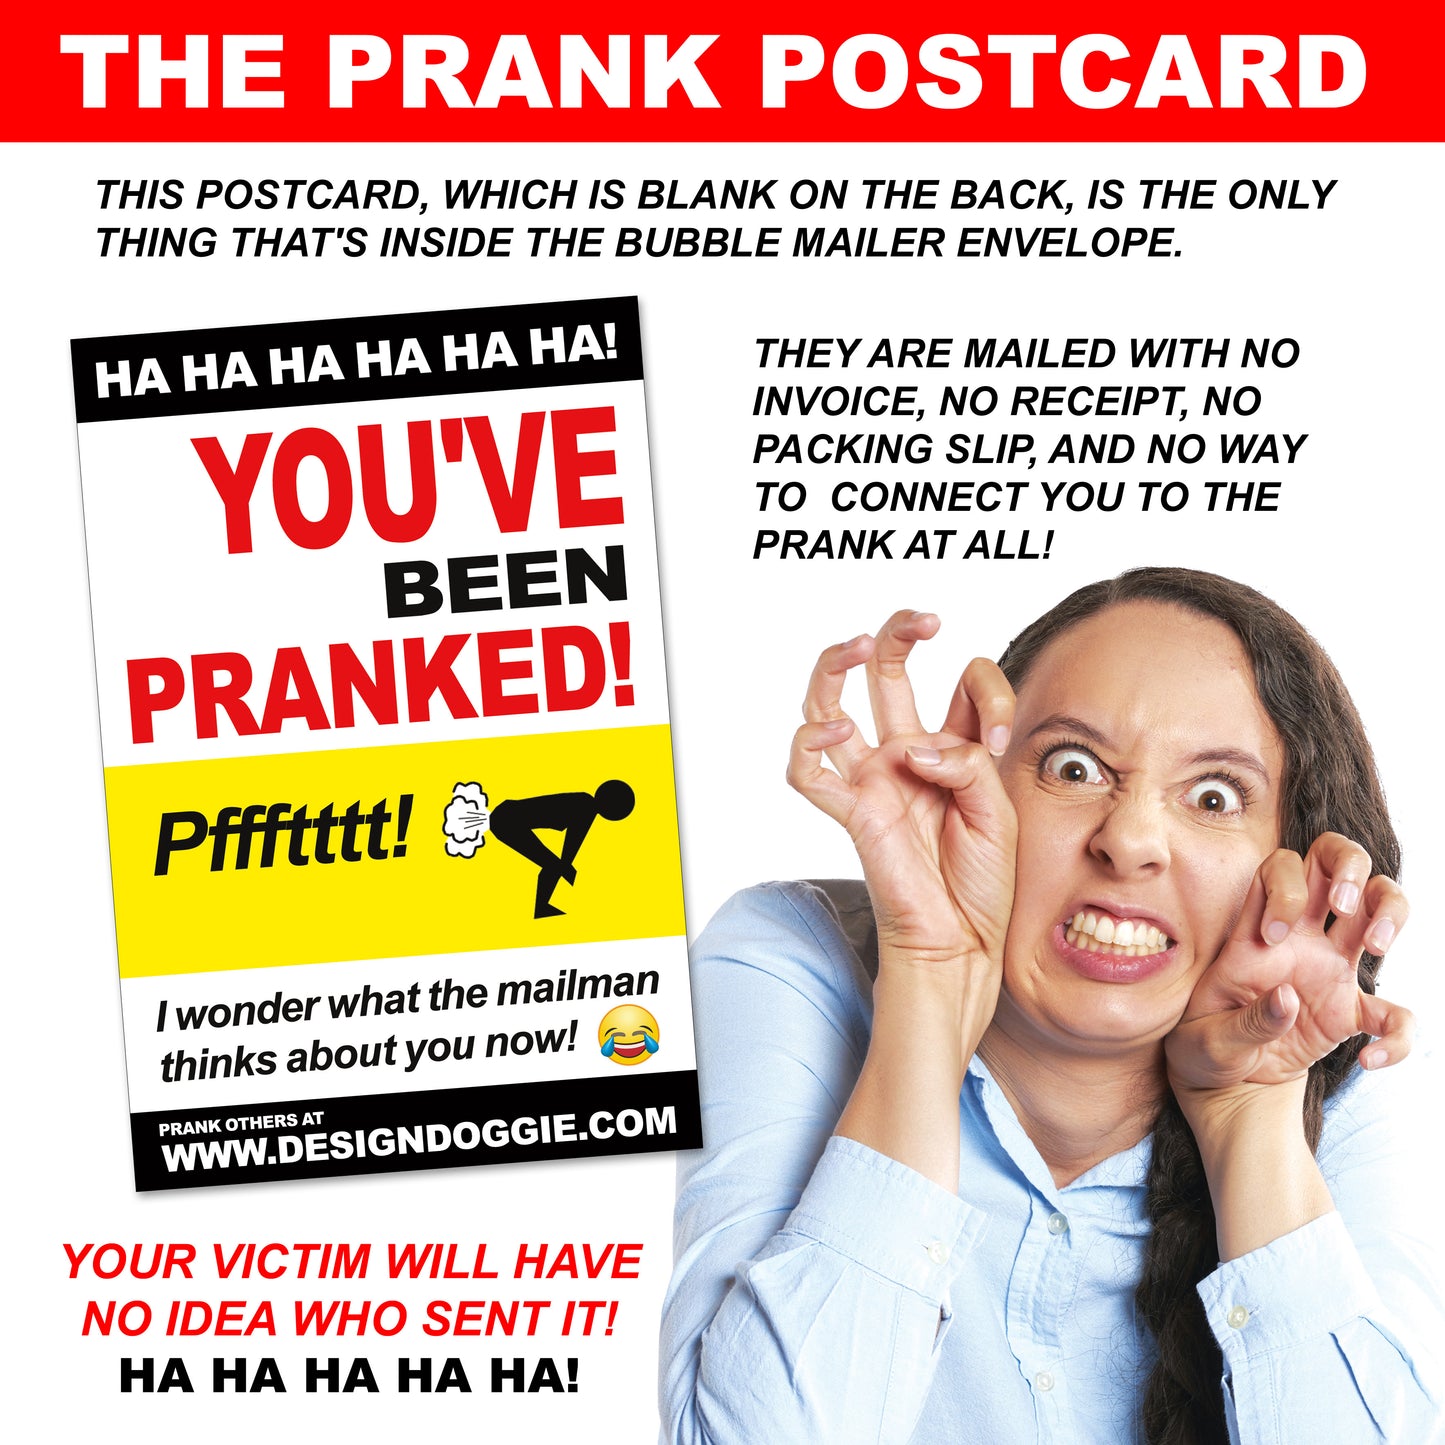 Furries with Benefits embarrassing prank envelope gets mailed directly to your victims 100% anonymously!